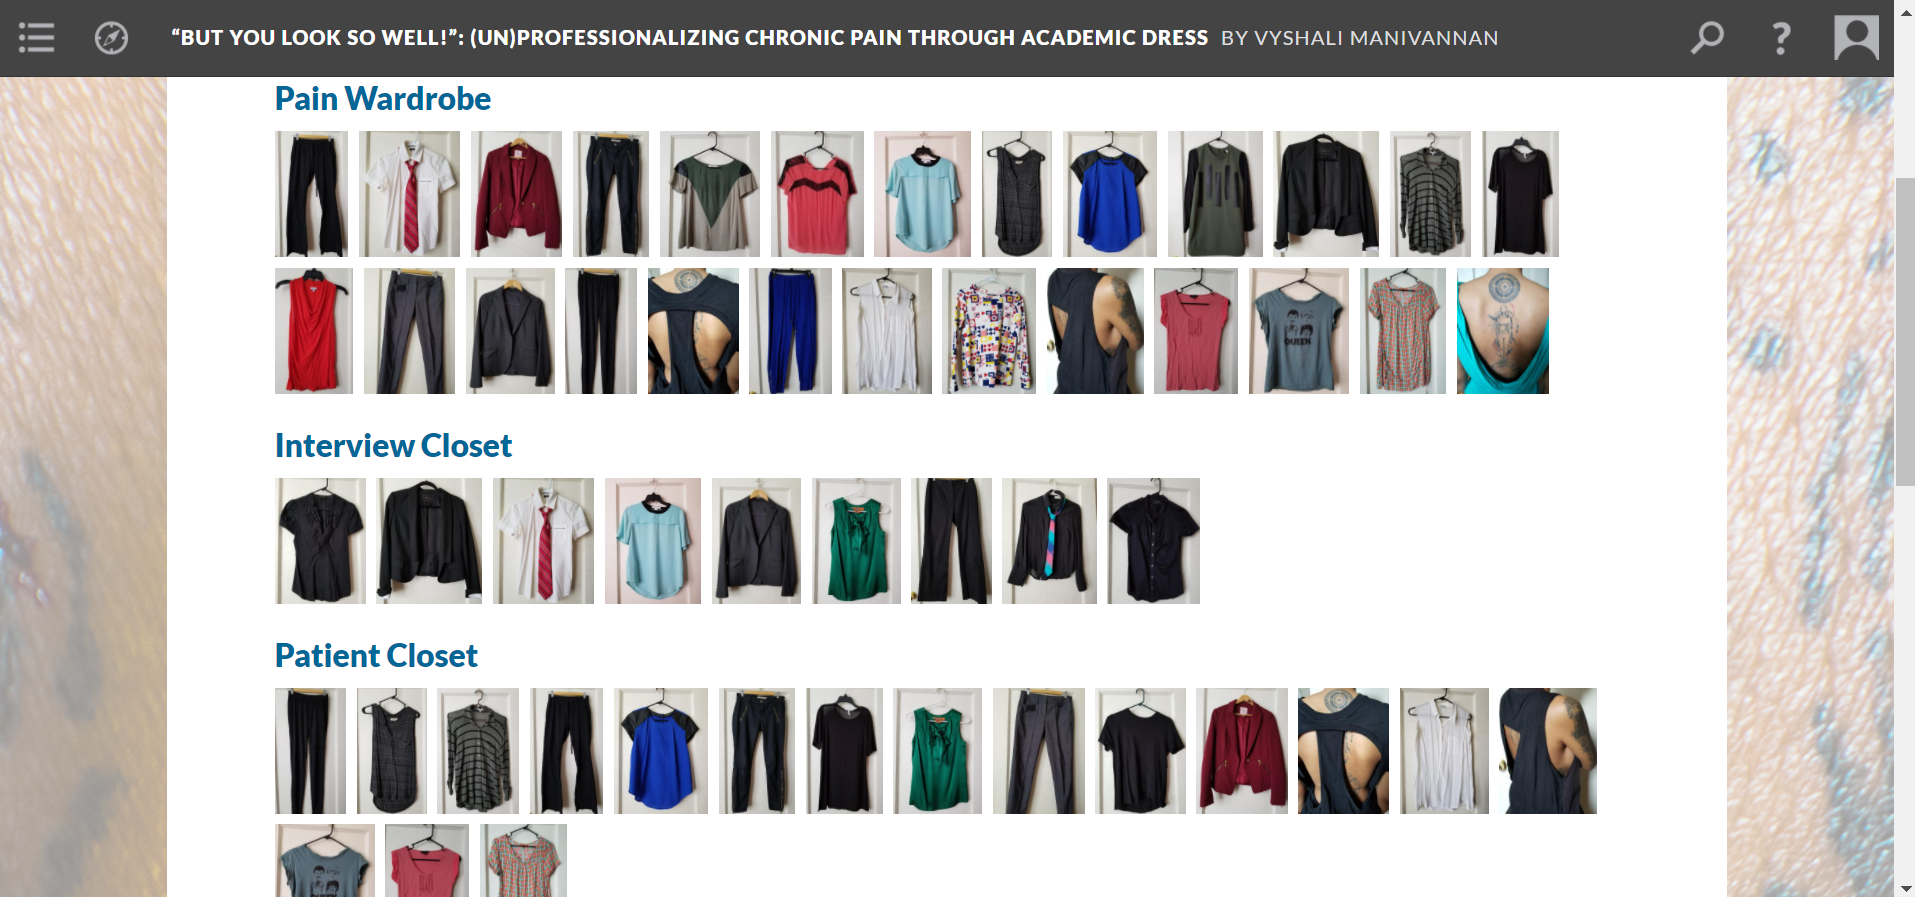 Thumbnails of blouses, slacks, and blazers organized into pain, interview, and patient wardrobes.